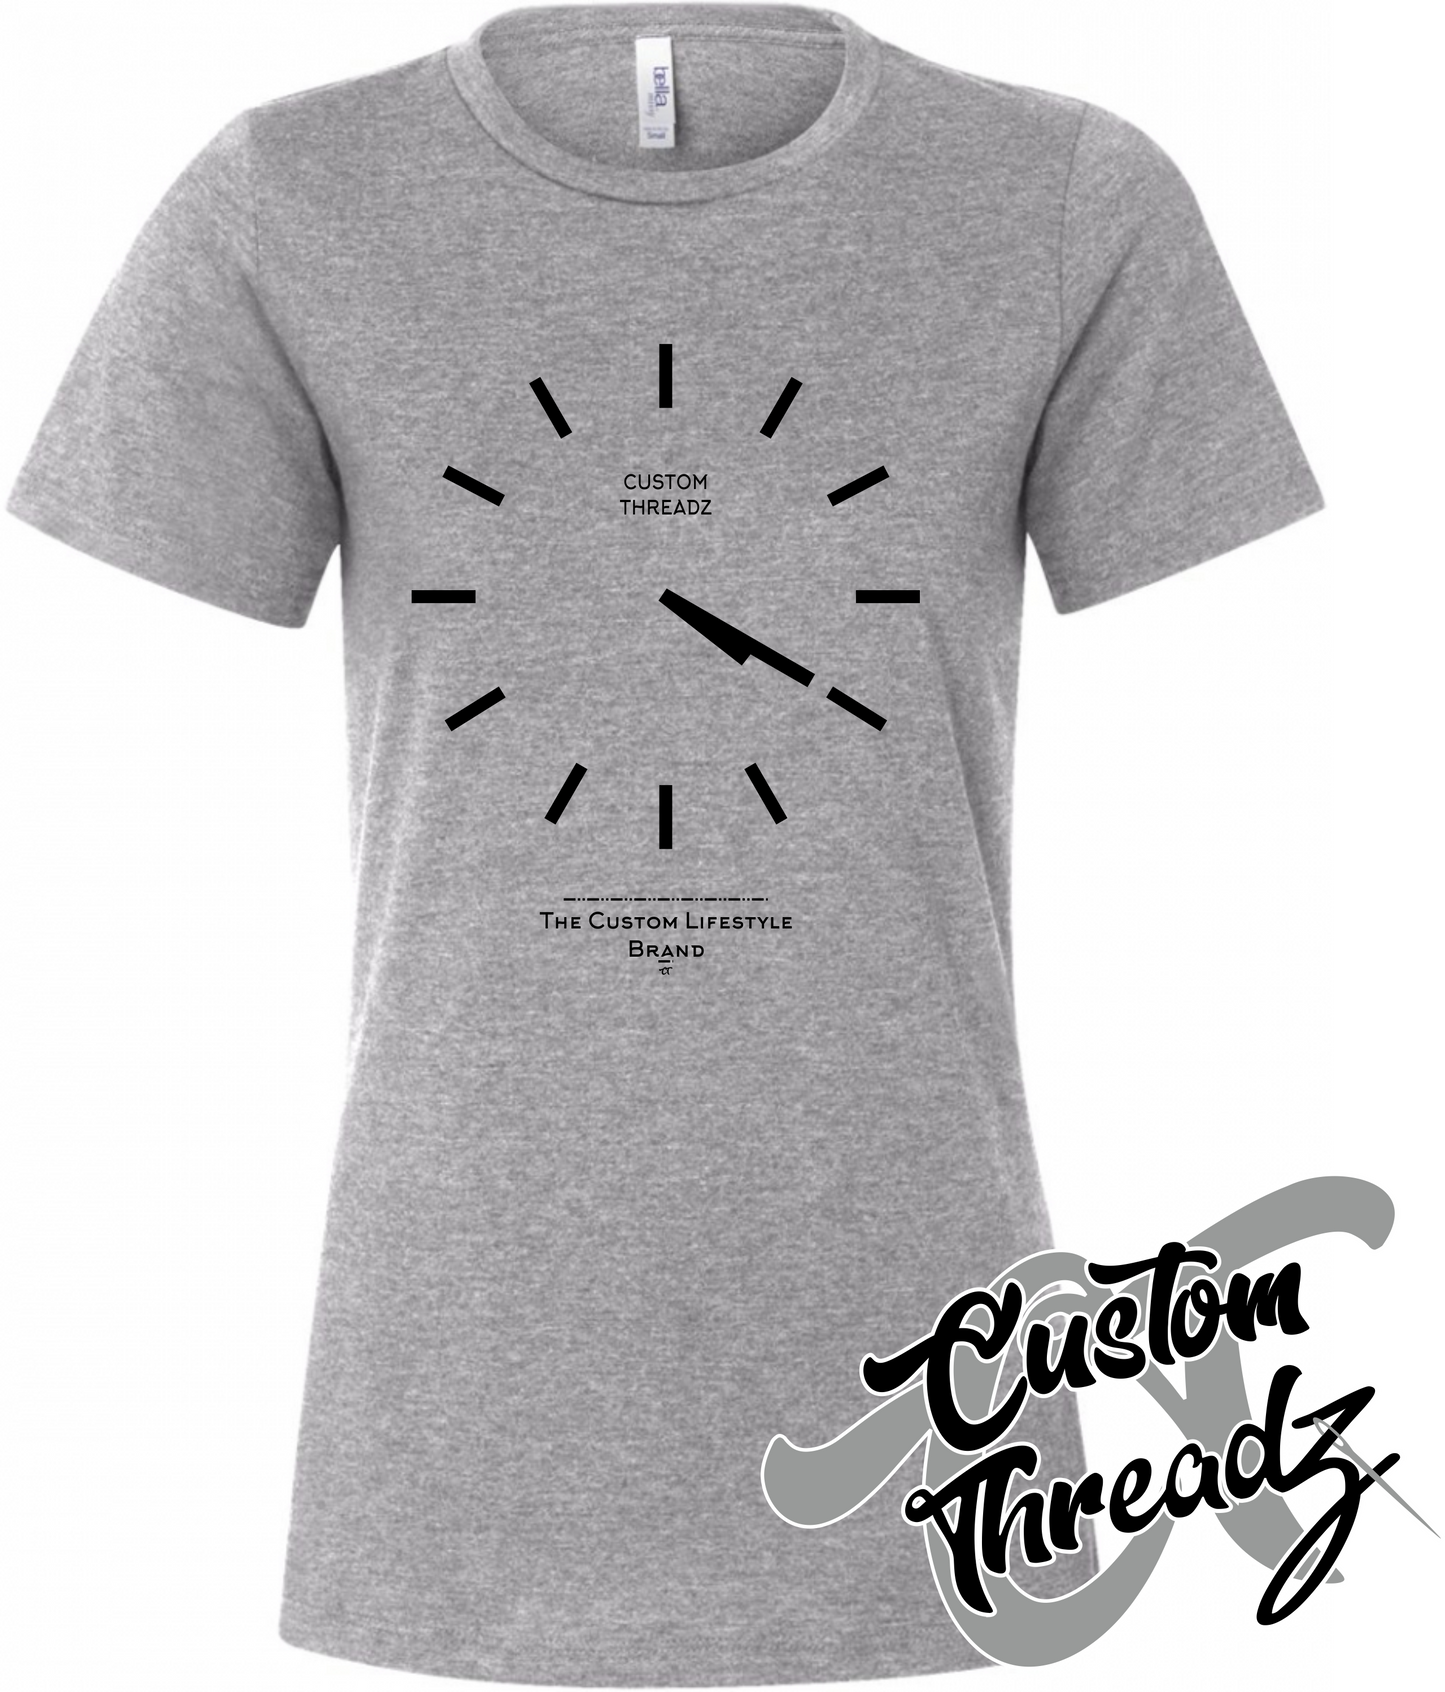 athletic heather grey womens tee with basic analog clock set to 4 20 DTG printed design